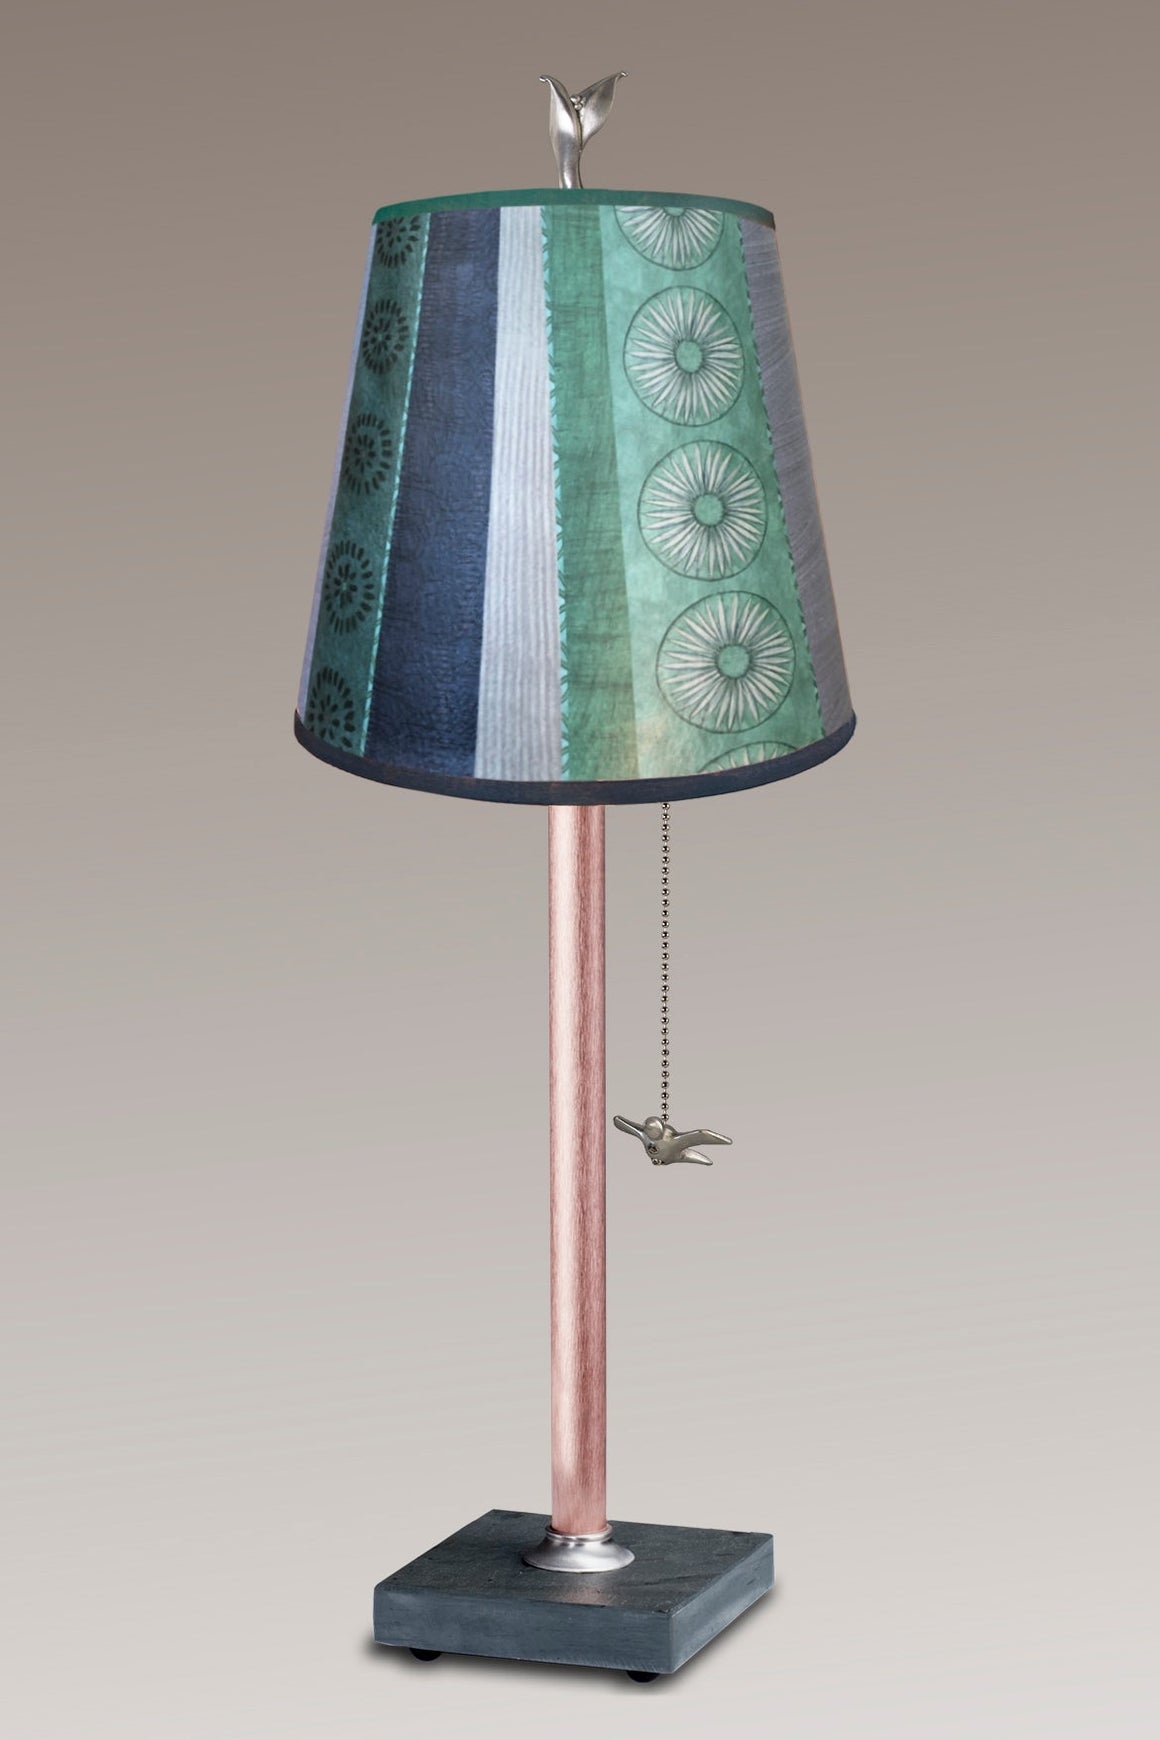 Copper Table Lamp with Small Drum Shade in Serape Waters